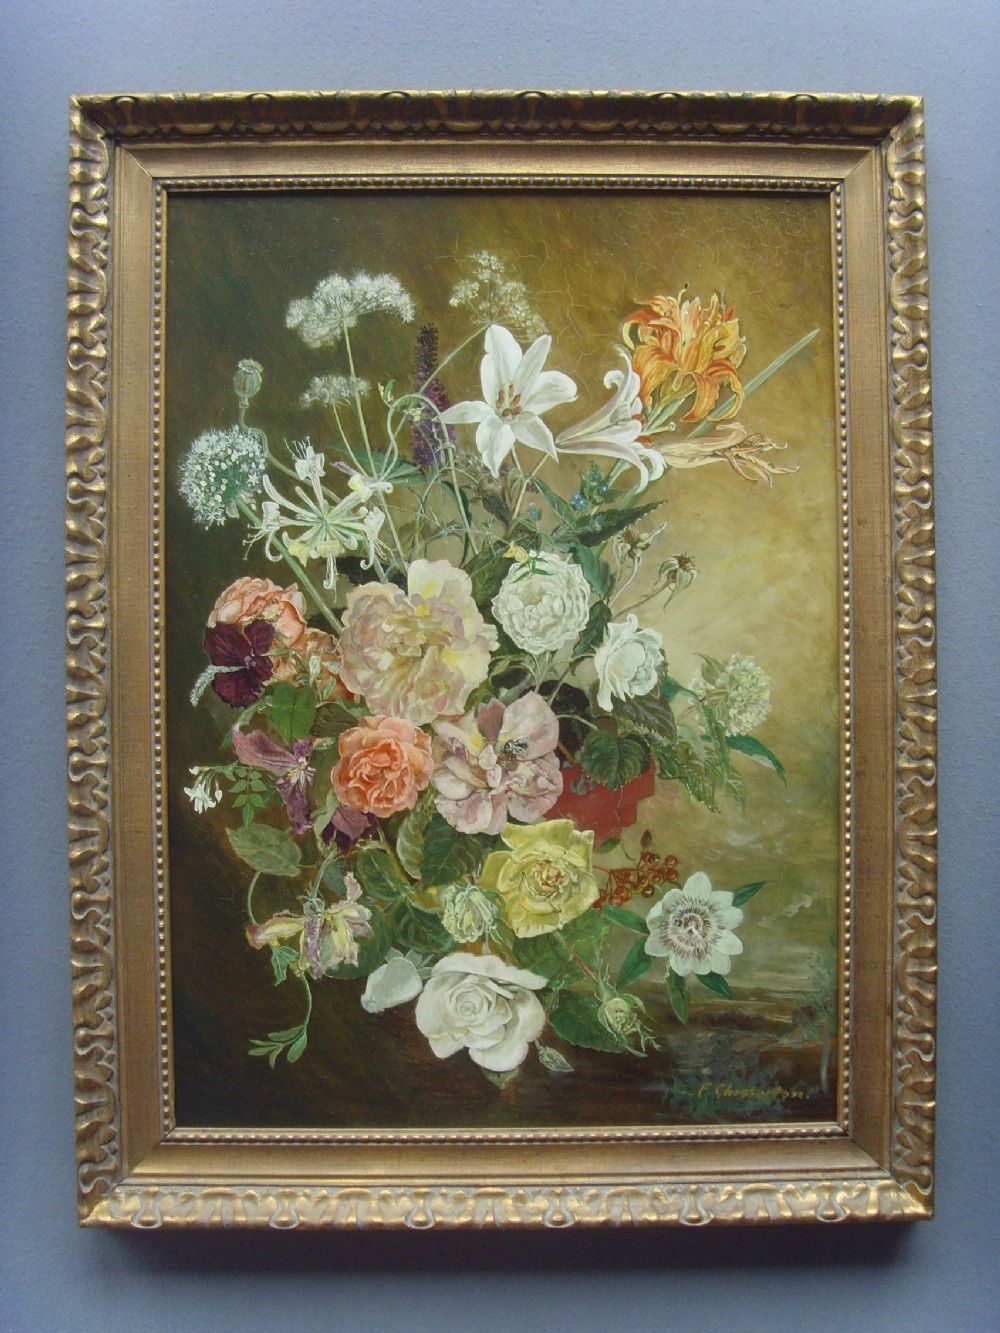 fine still life flower oil painting by chesterton oflillies lavender honeysuckle roses passionflower and poppies approx size 35 x 27 inches